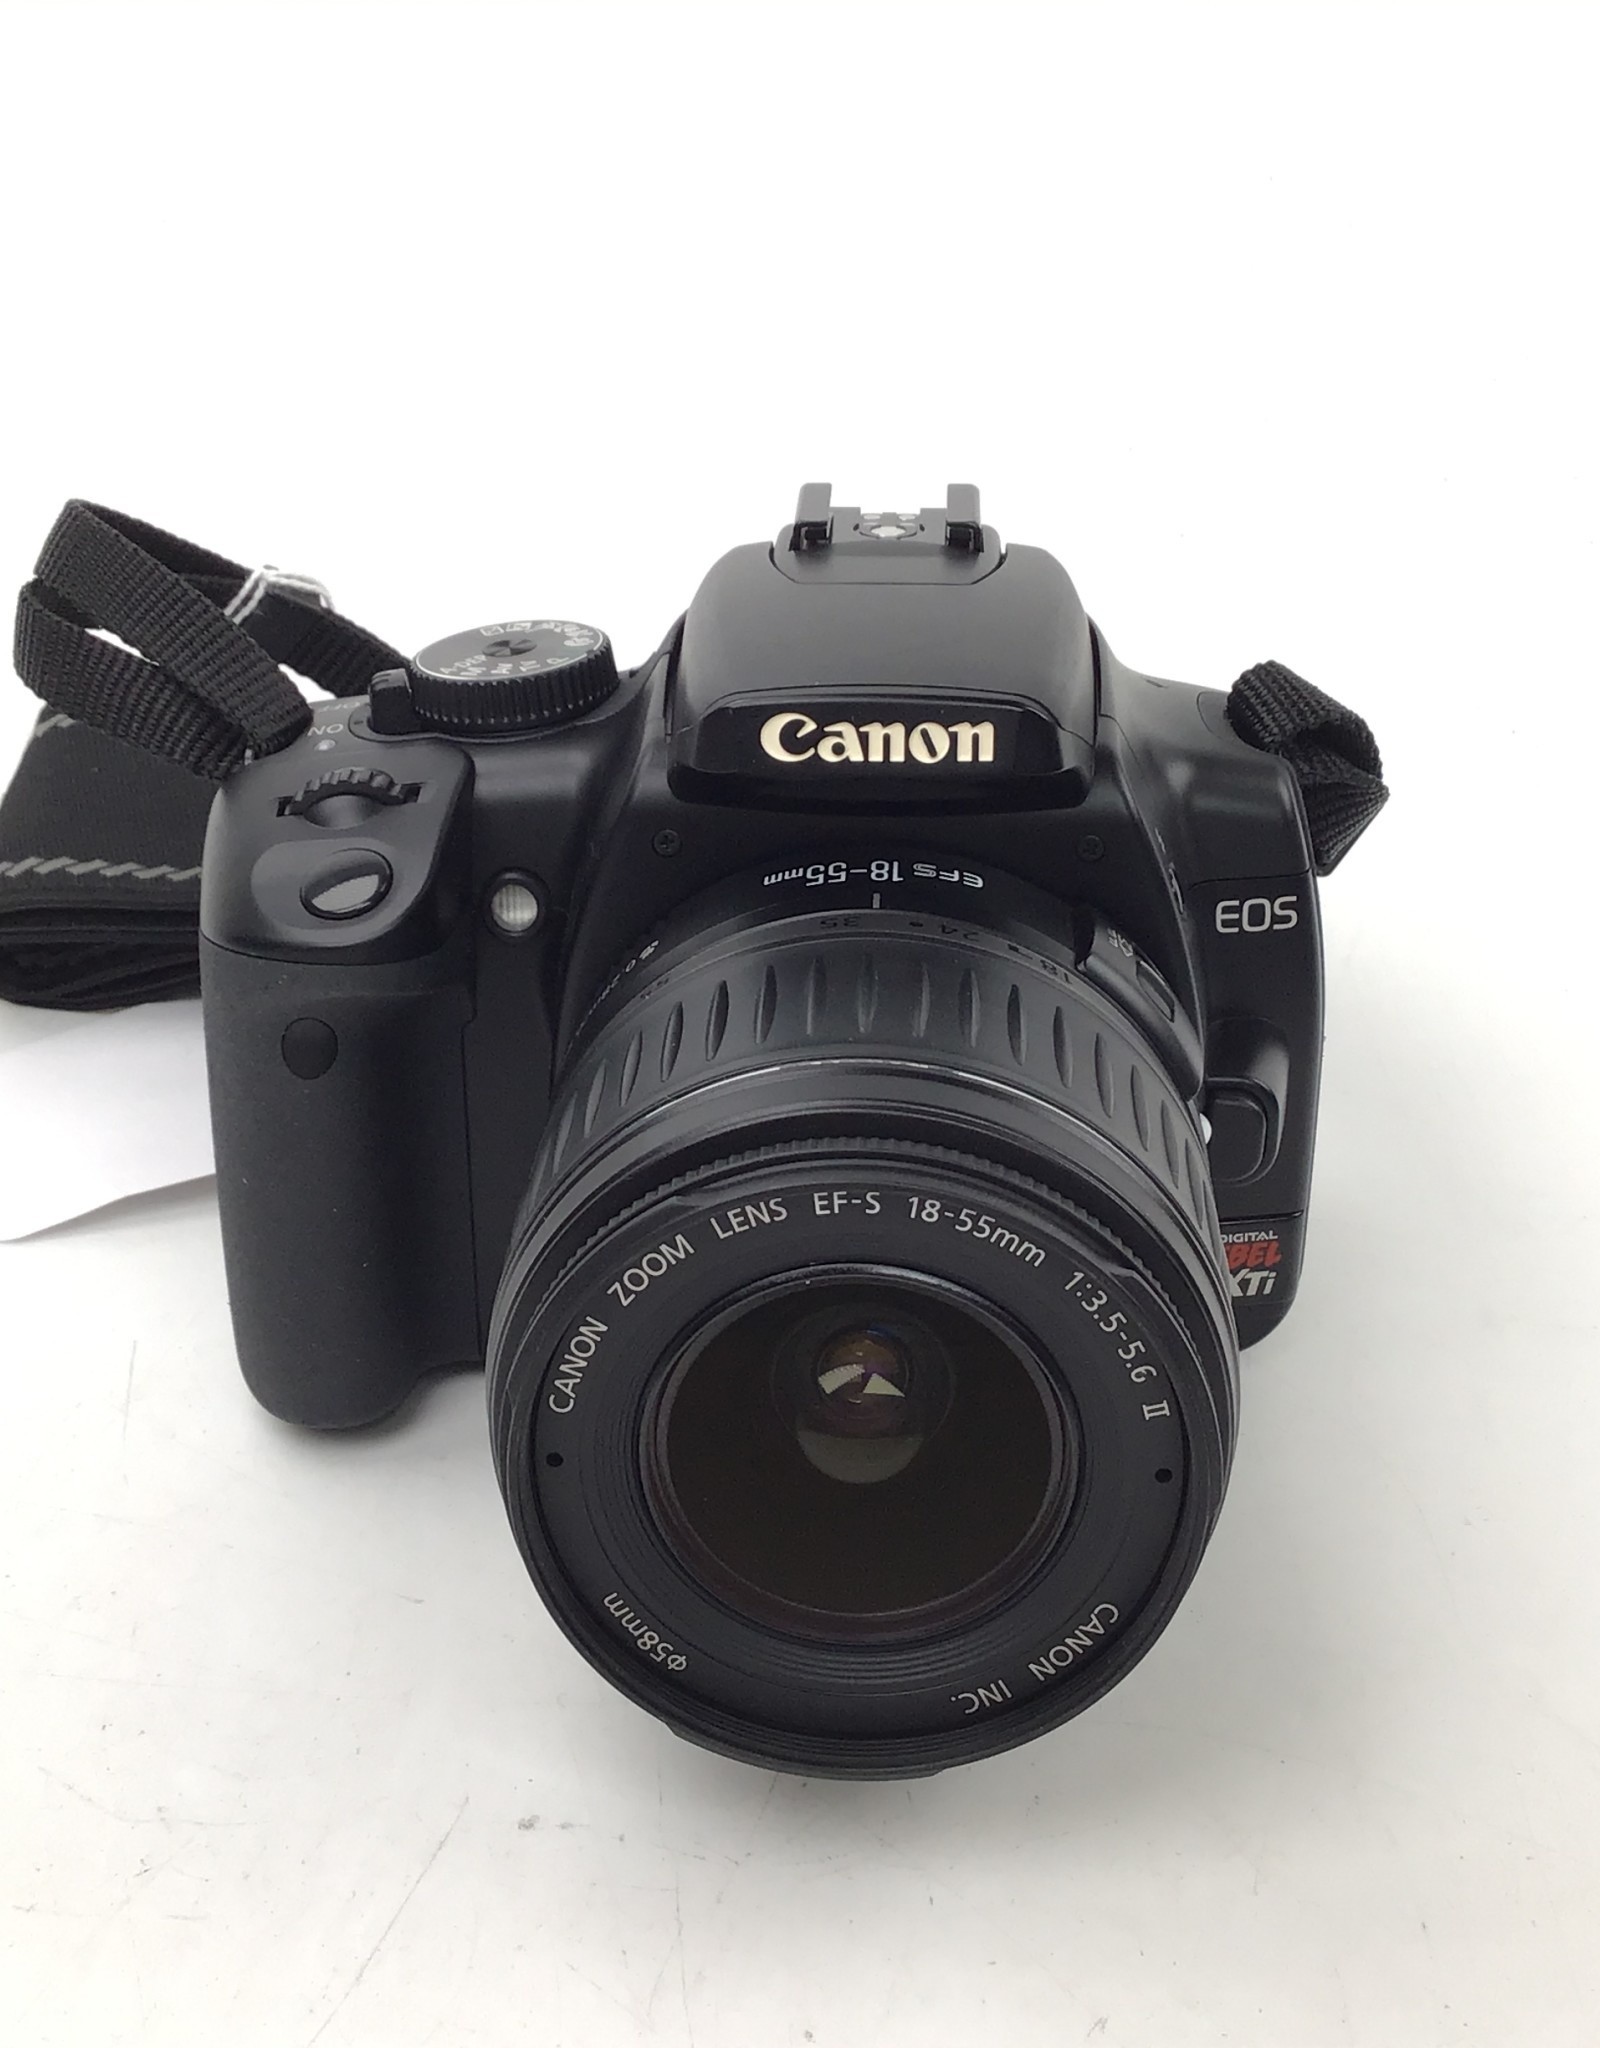 CANON Canon Rebel Xti Camera with 18-55mm Used Good